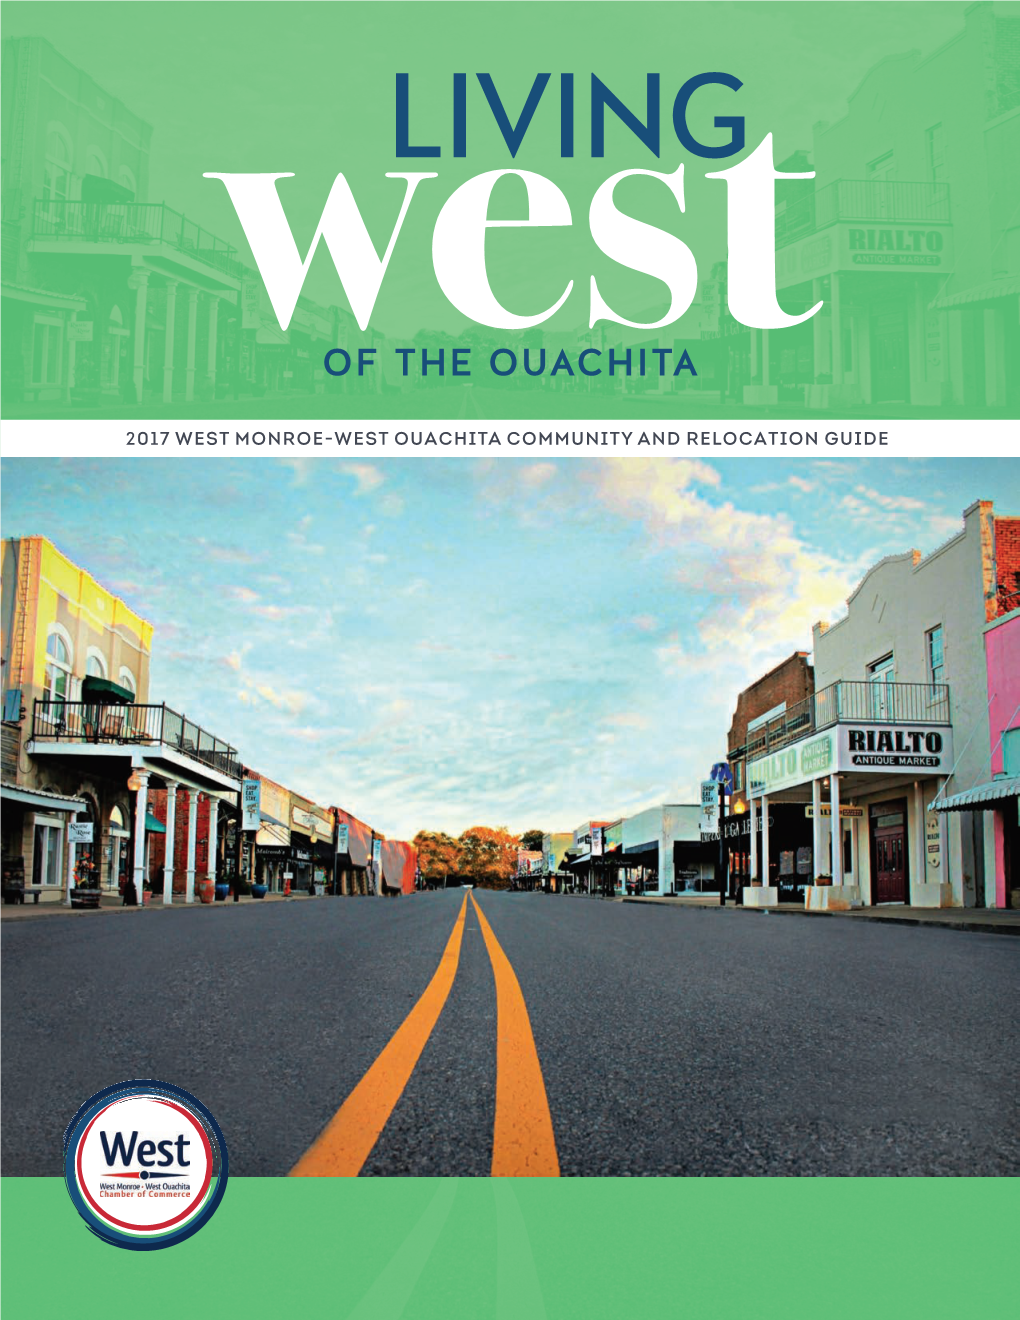 2017 West Monroe-West Ouachita Community and Relocation Guide